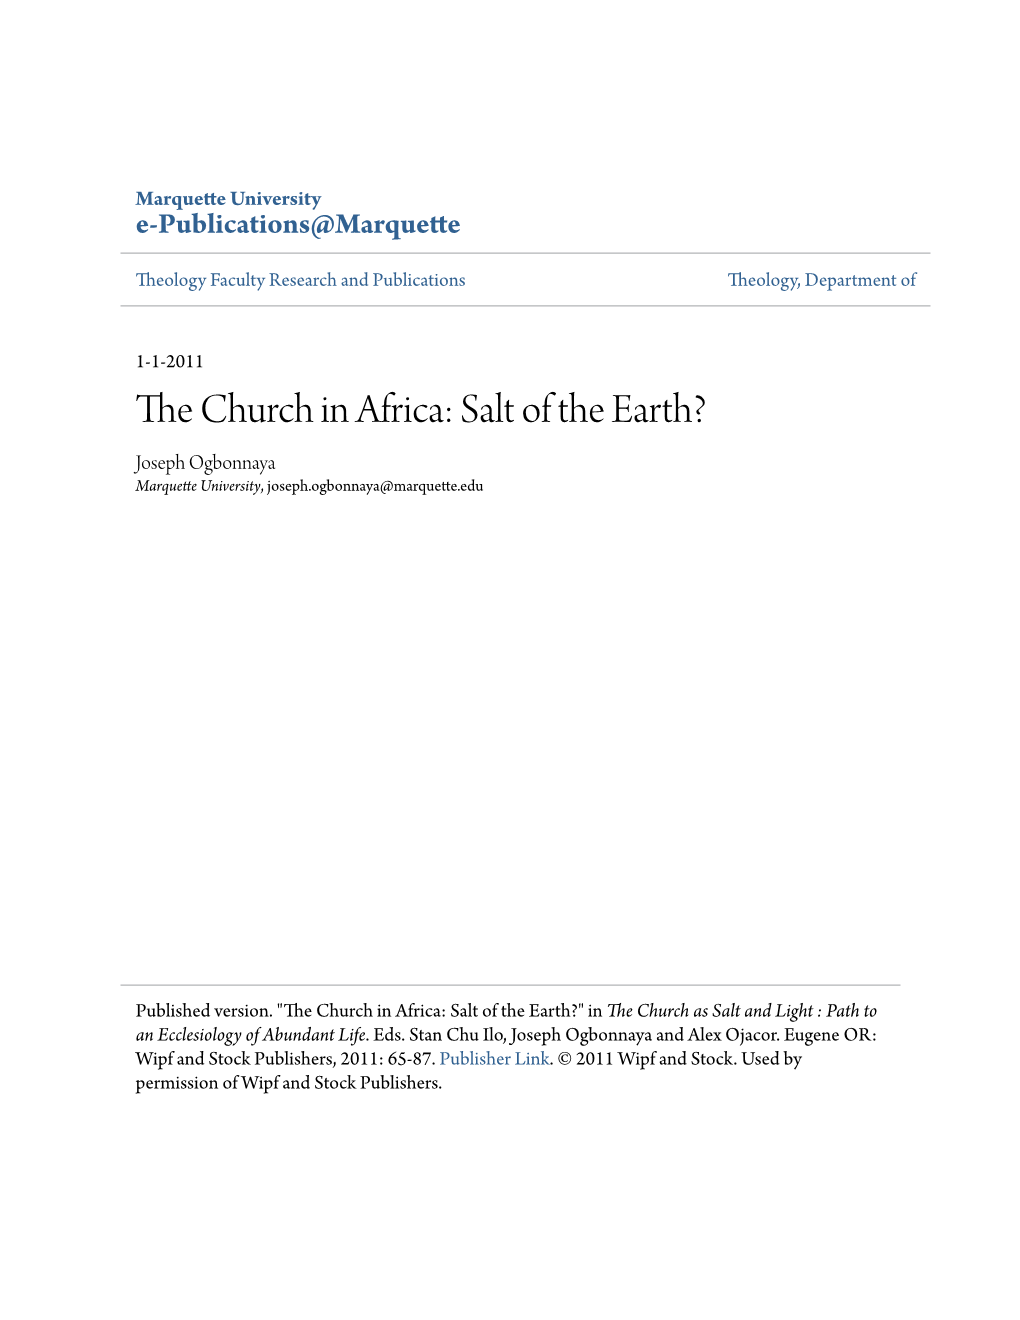 The Church in Africa: Salt of the Earth? Various Sectors Into the Life of the Church, According to Each Person's Or Group's Abilities